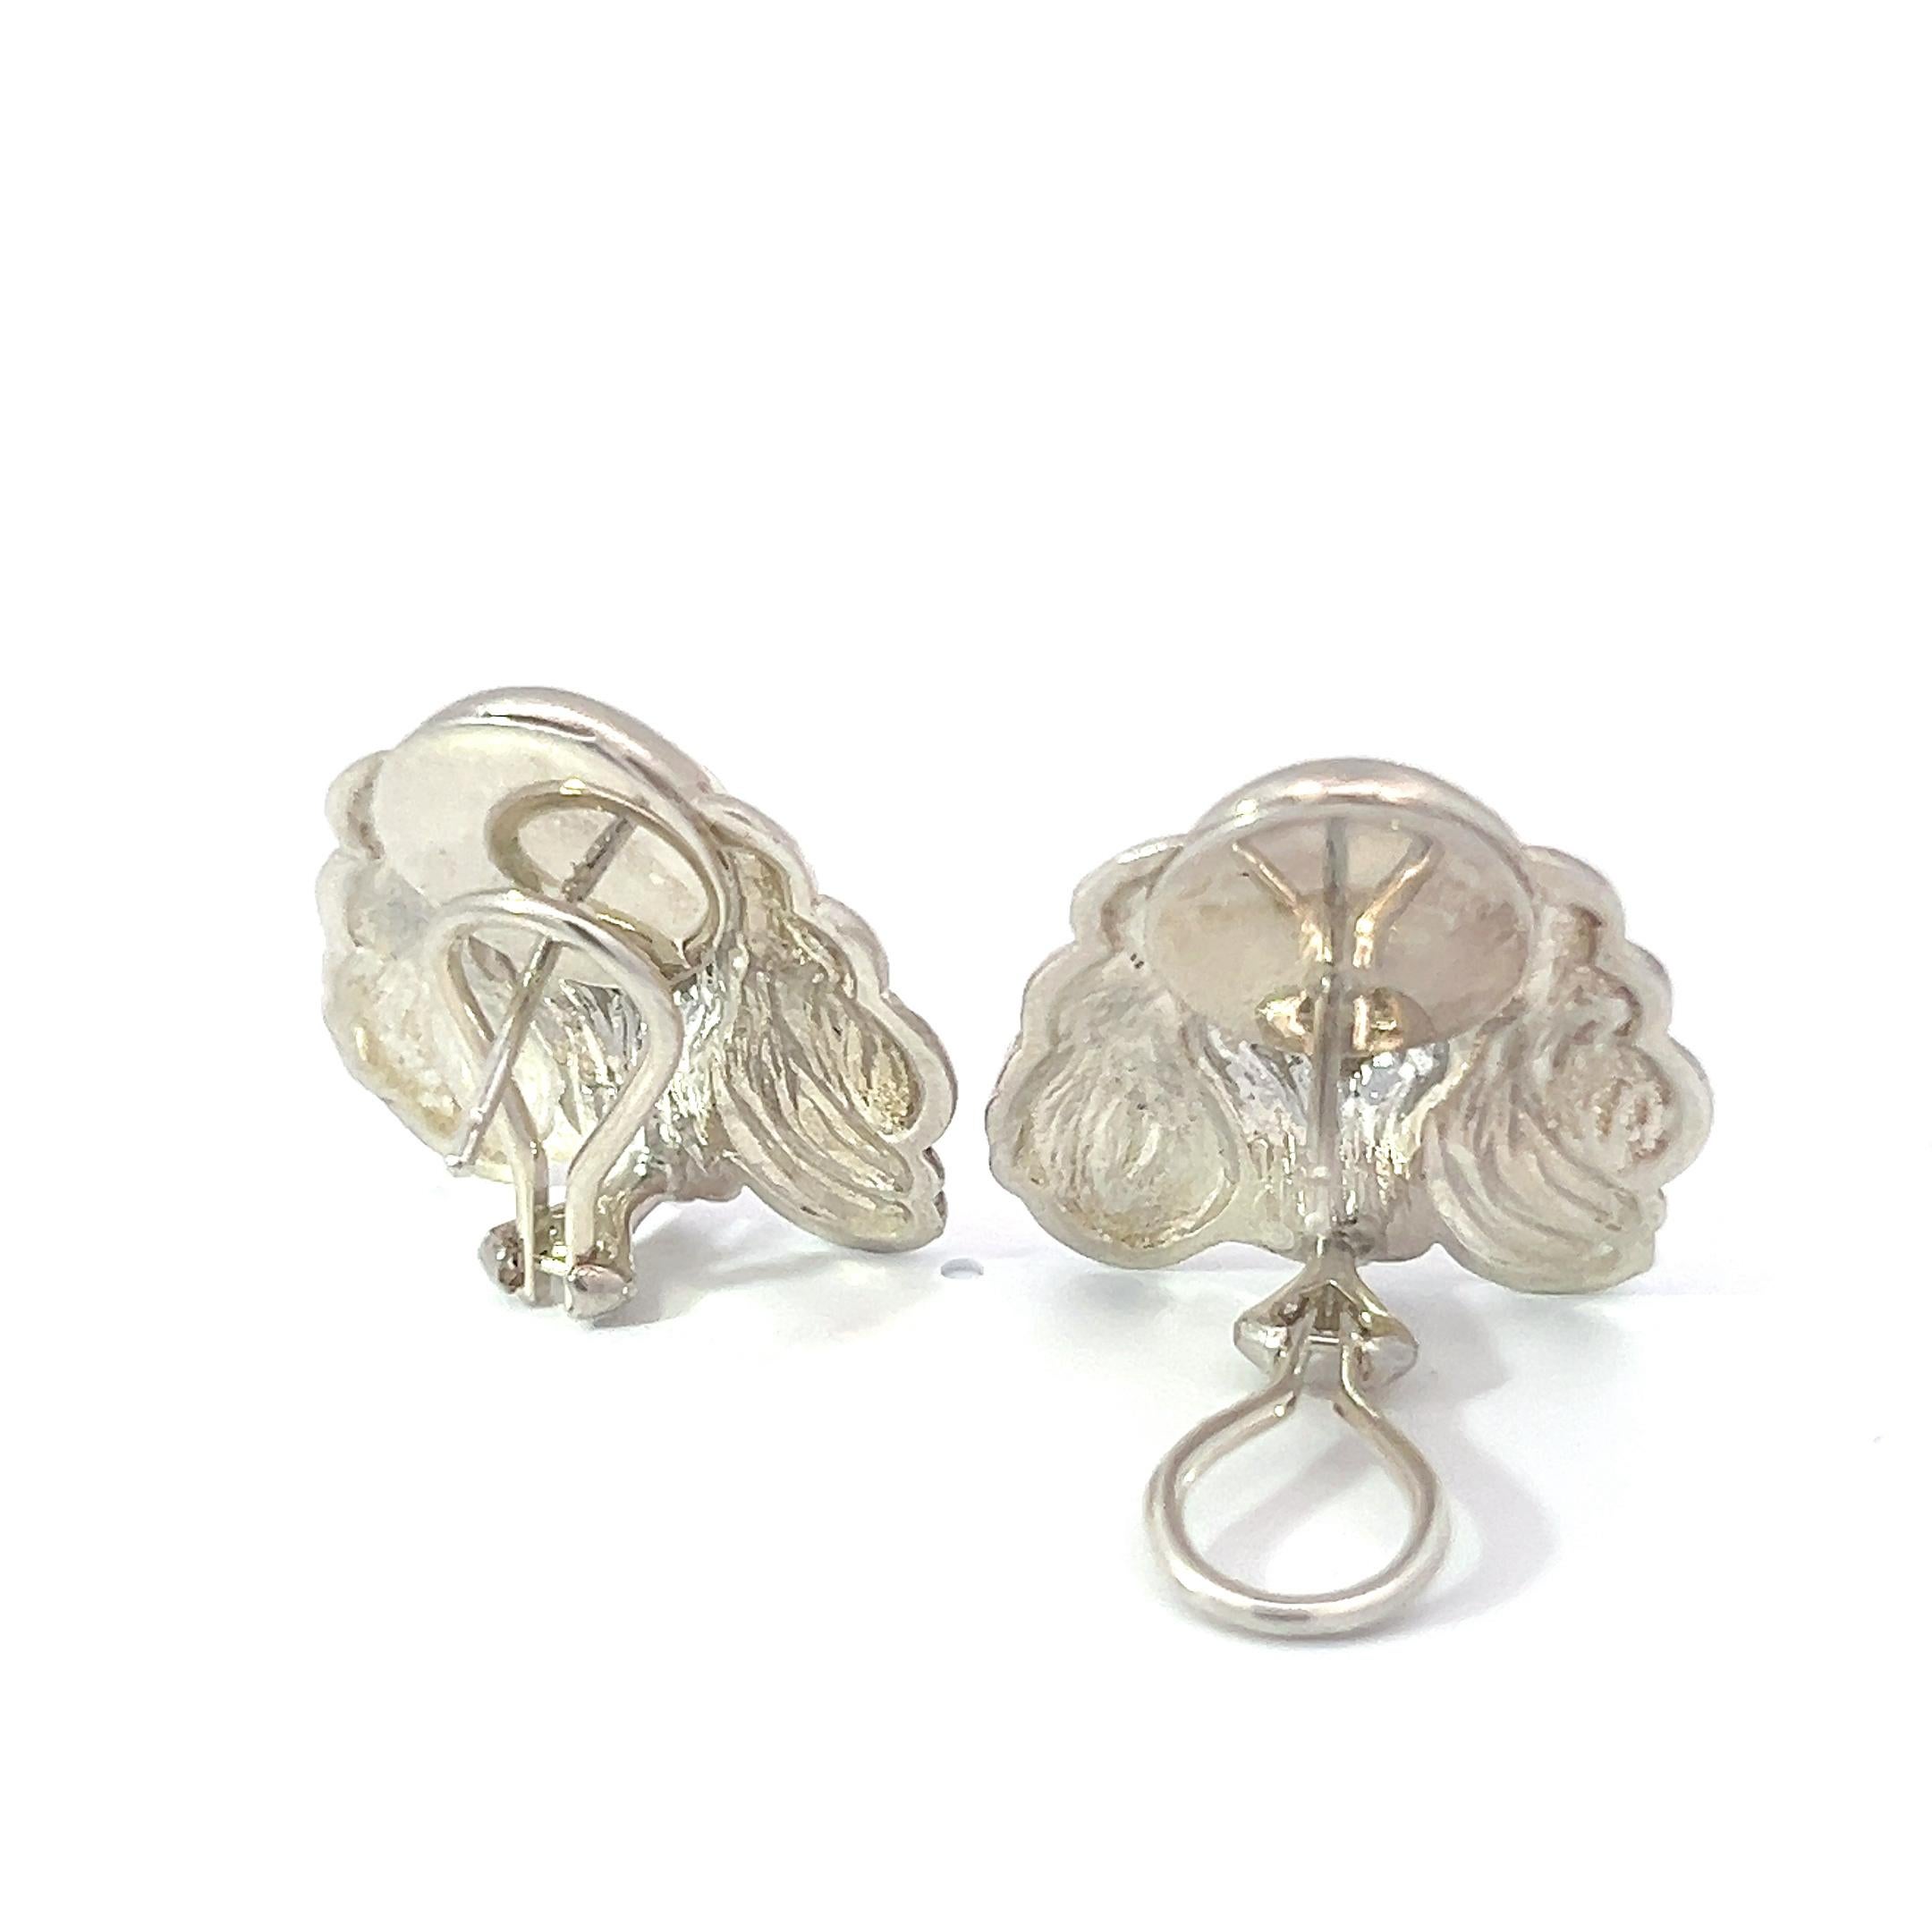 Infuse whimsical charm into your style with our Sterling Silver Cocker Spaniel Dog Clip-On Earrings, a delightful expression of playful elegance. Crafted with precision, these earrings feature endearing puddle dog motifs cast in lustrous sterling